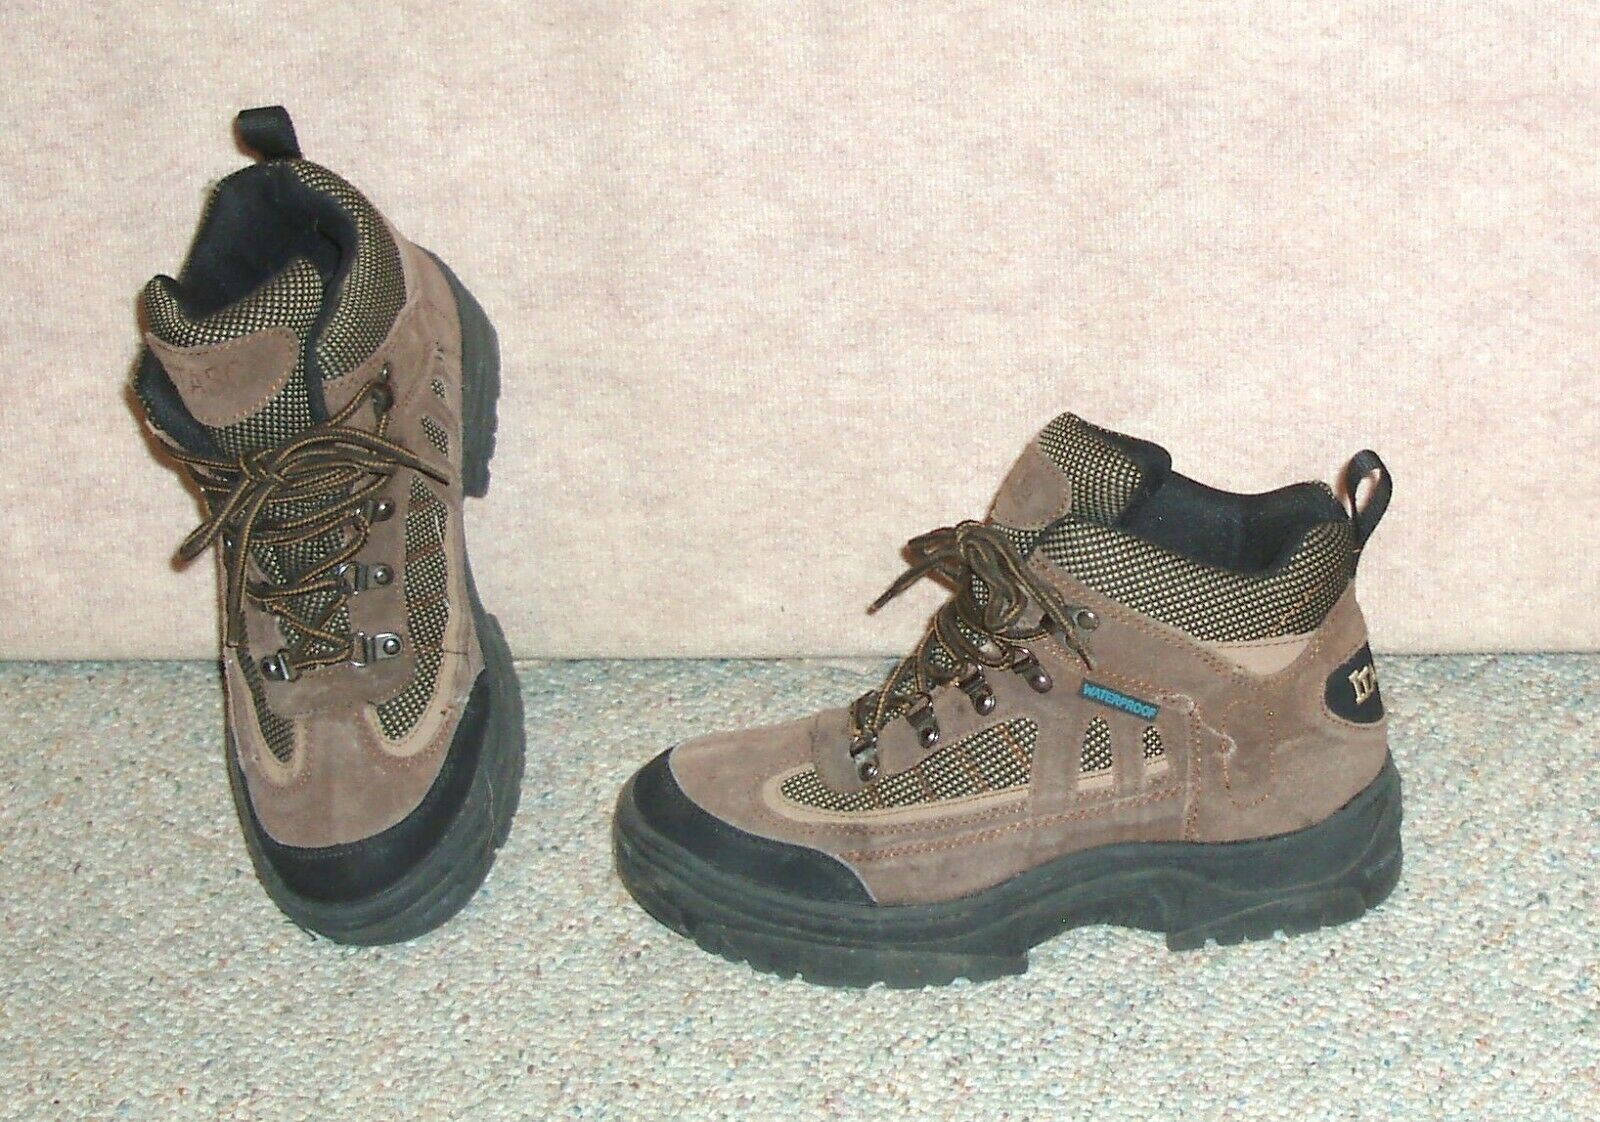 Men's leather upper ITASCA waterproof hiking / everyday boots 456520 , size 8.5